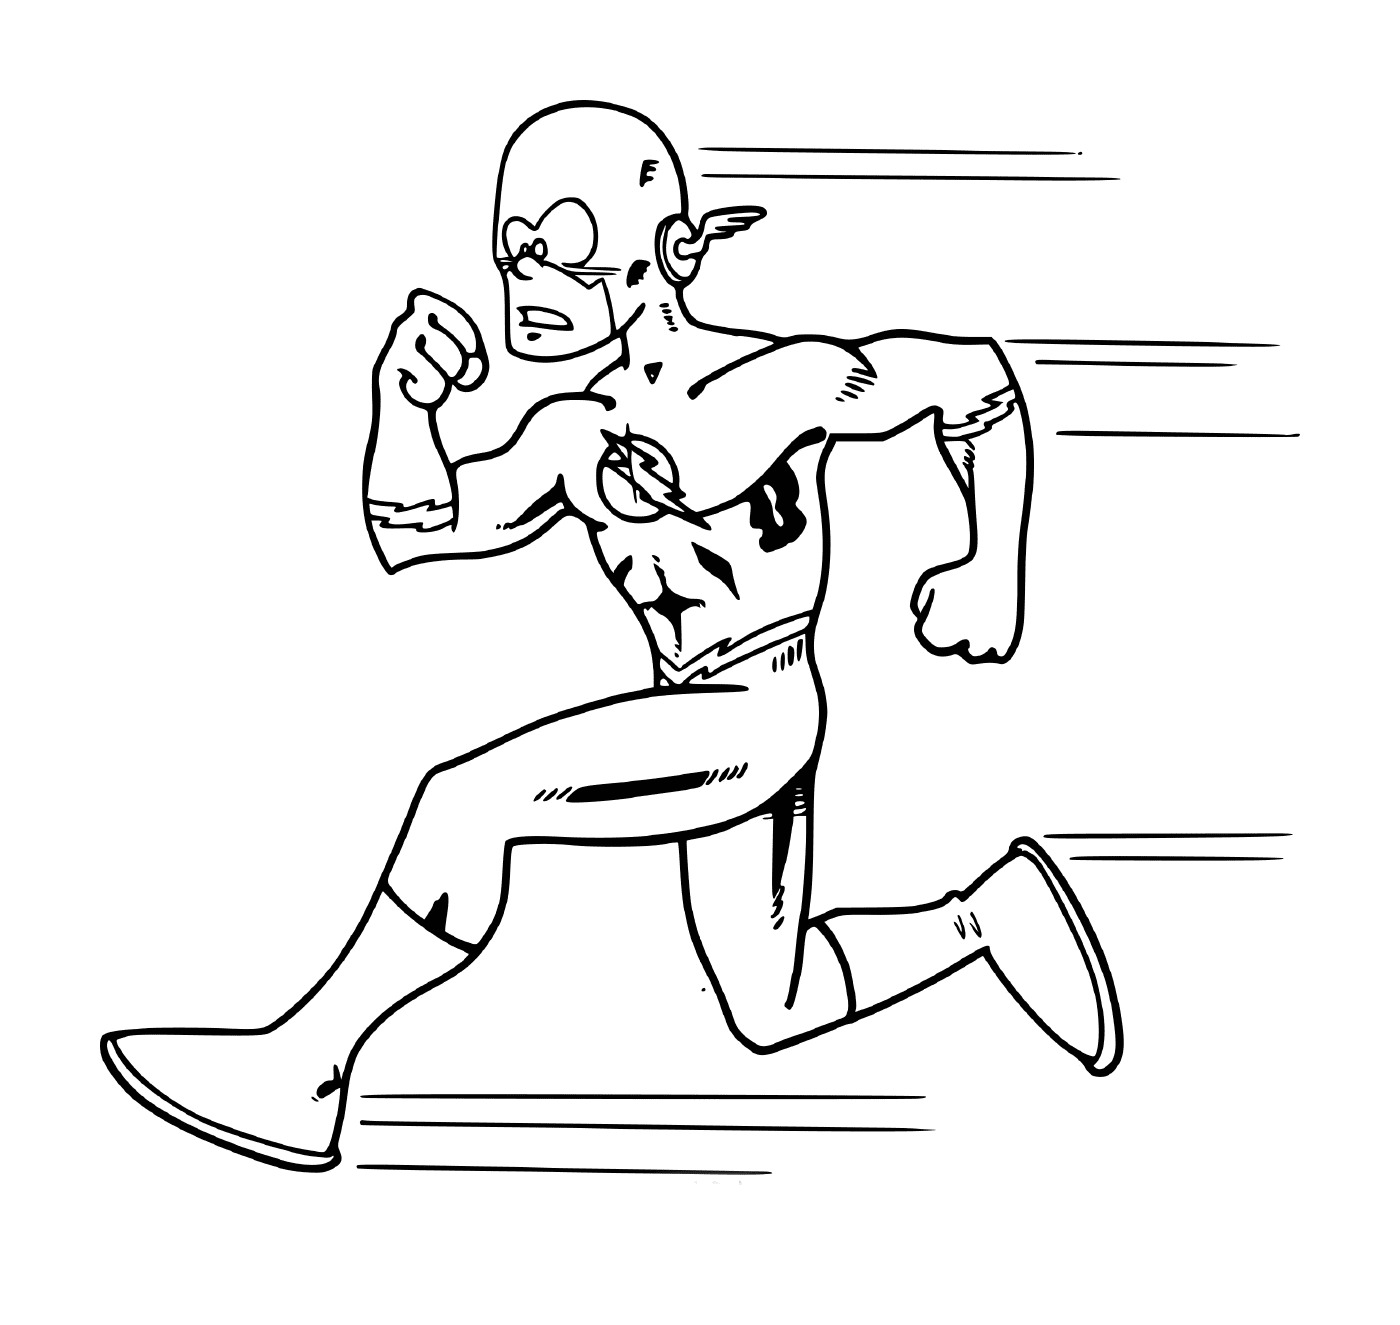  Super hero flash in the middle of the race 